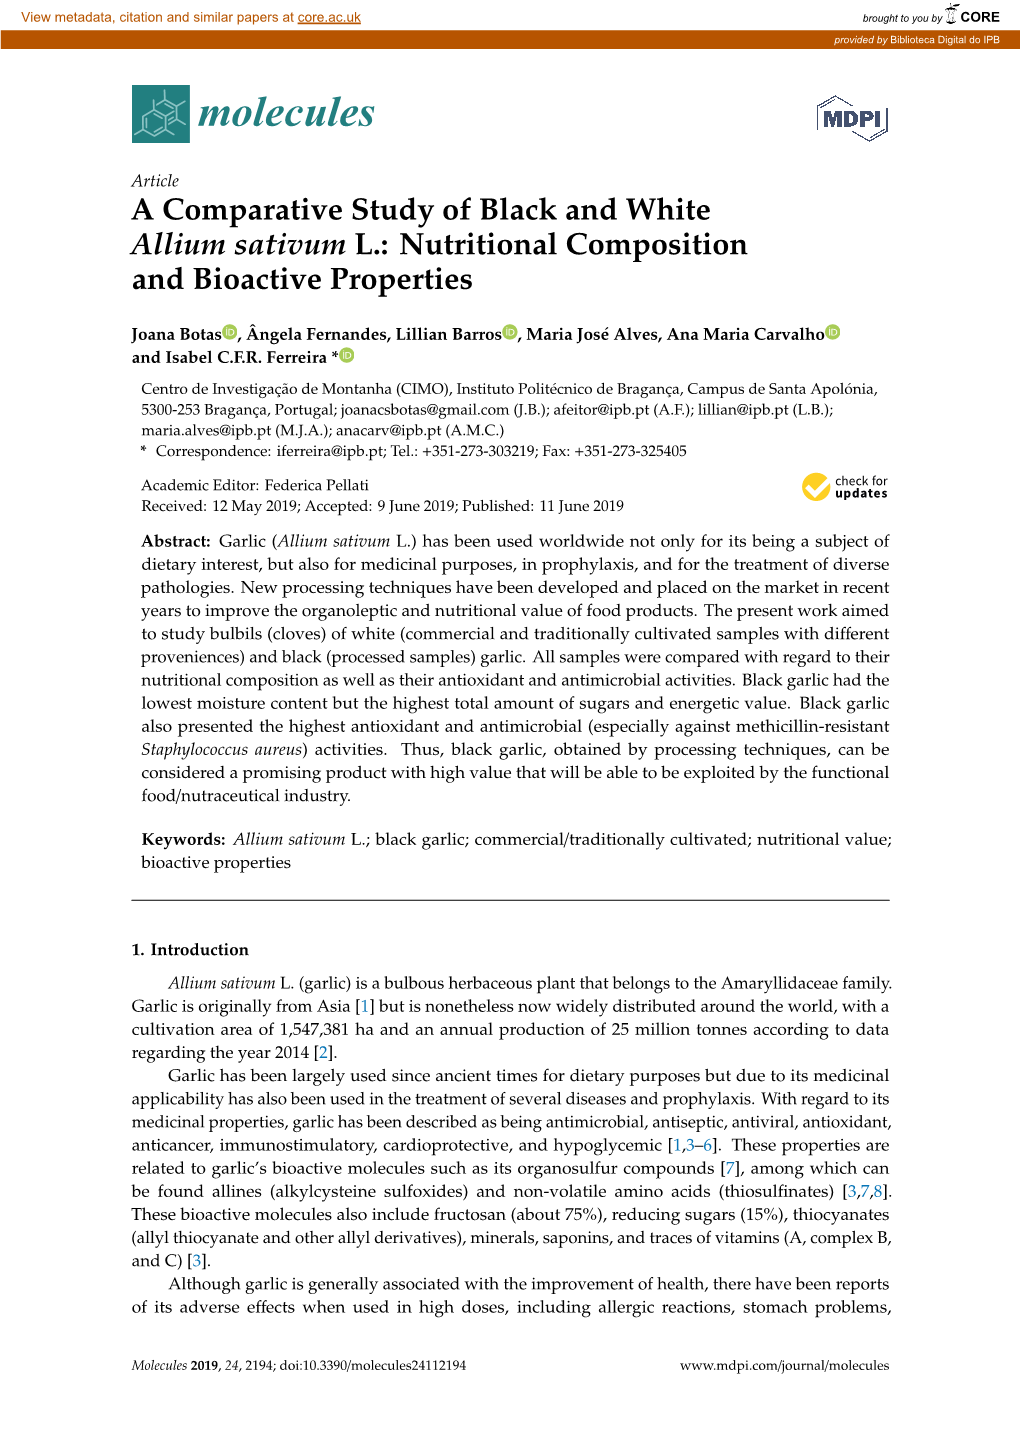 A Comparative Study of Black and White Allium Sativum L.: Nutritional Composition and Bioactive Properties